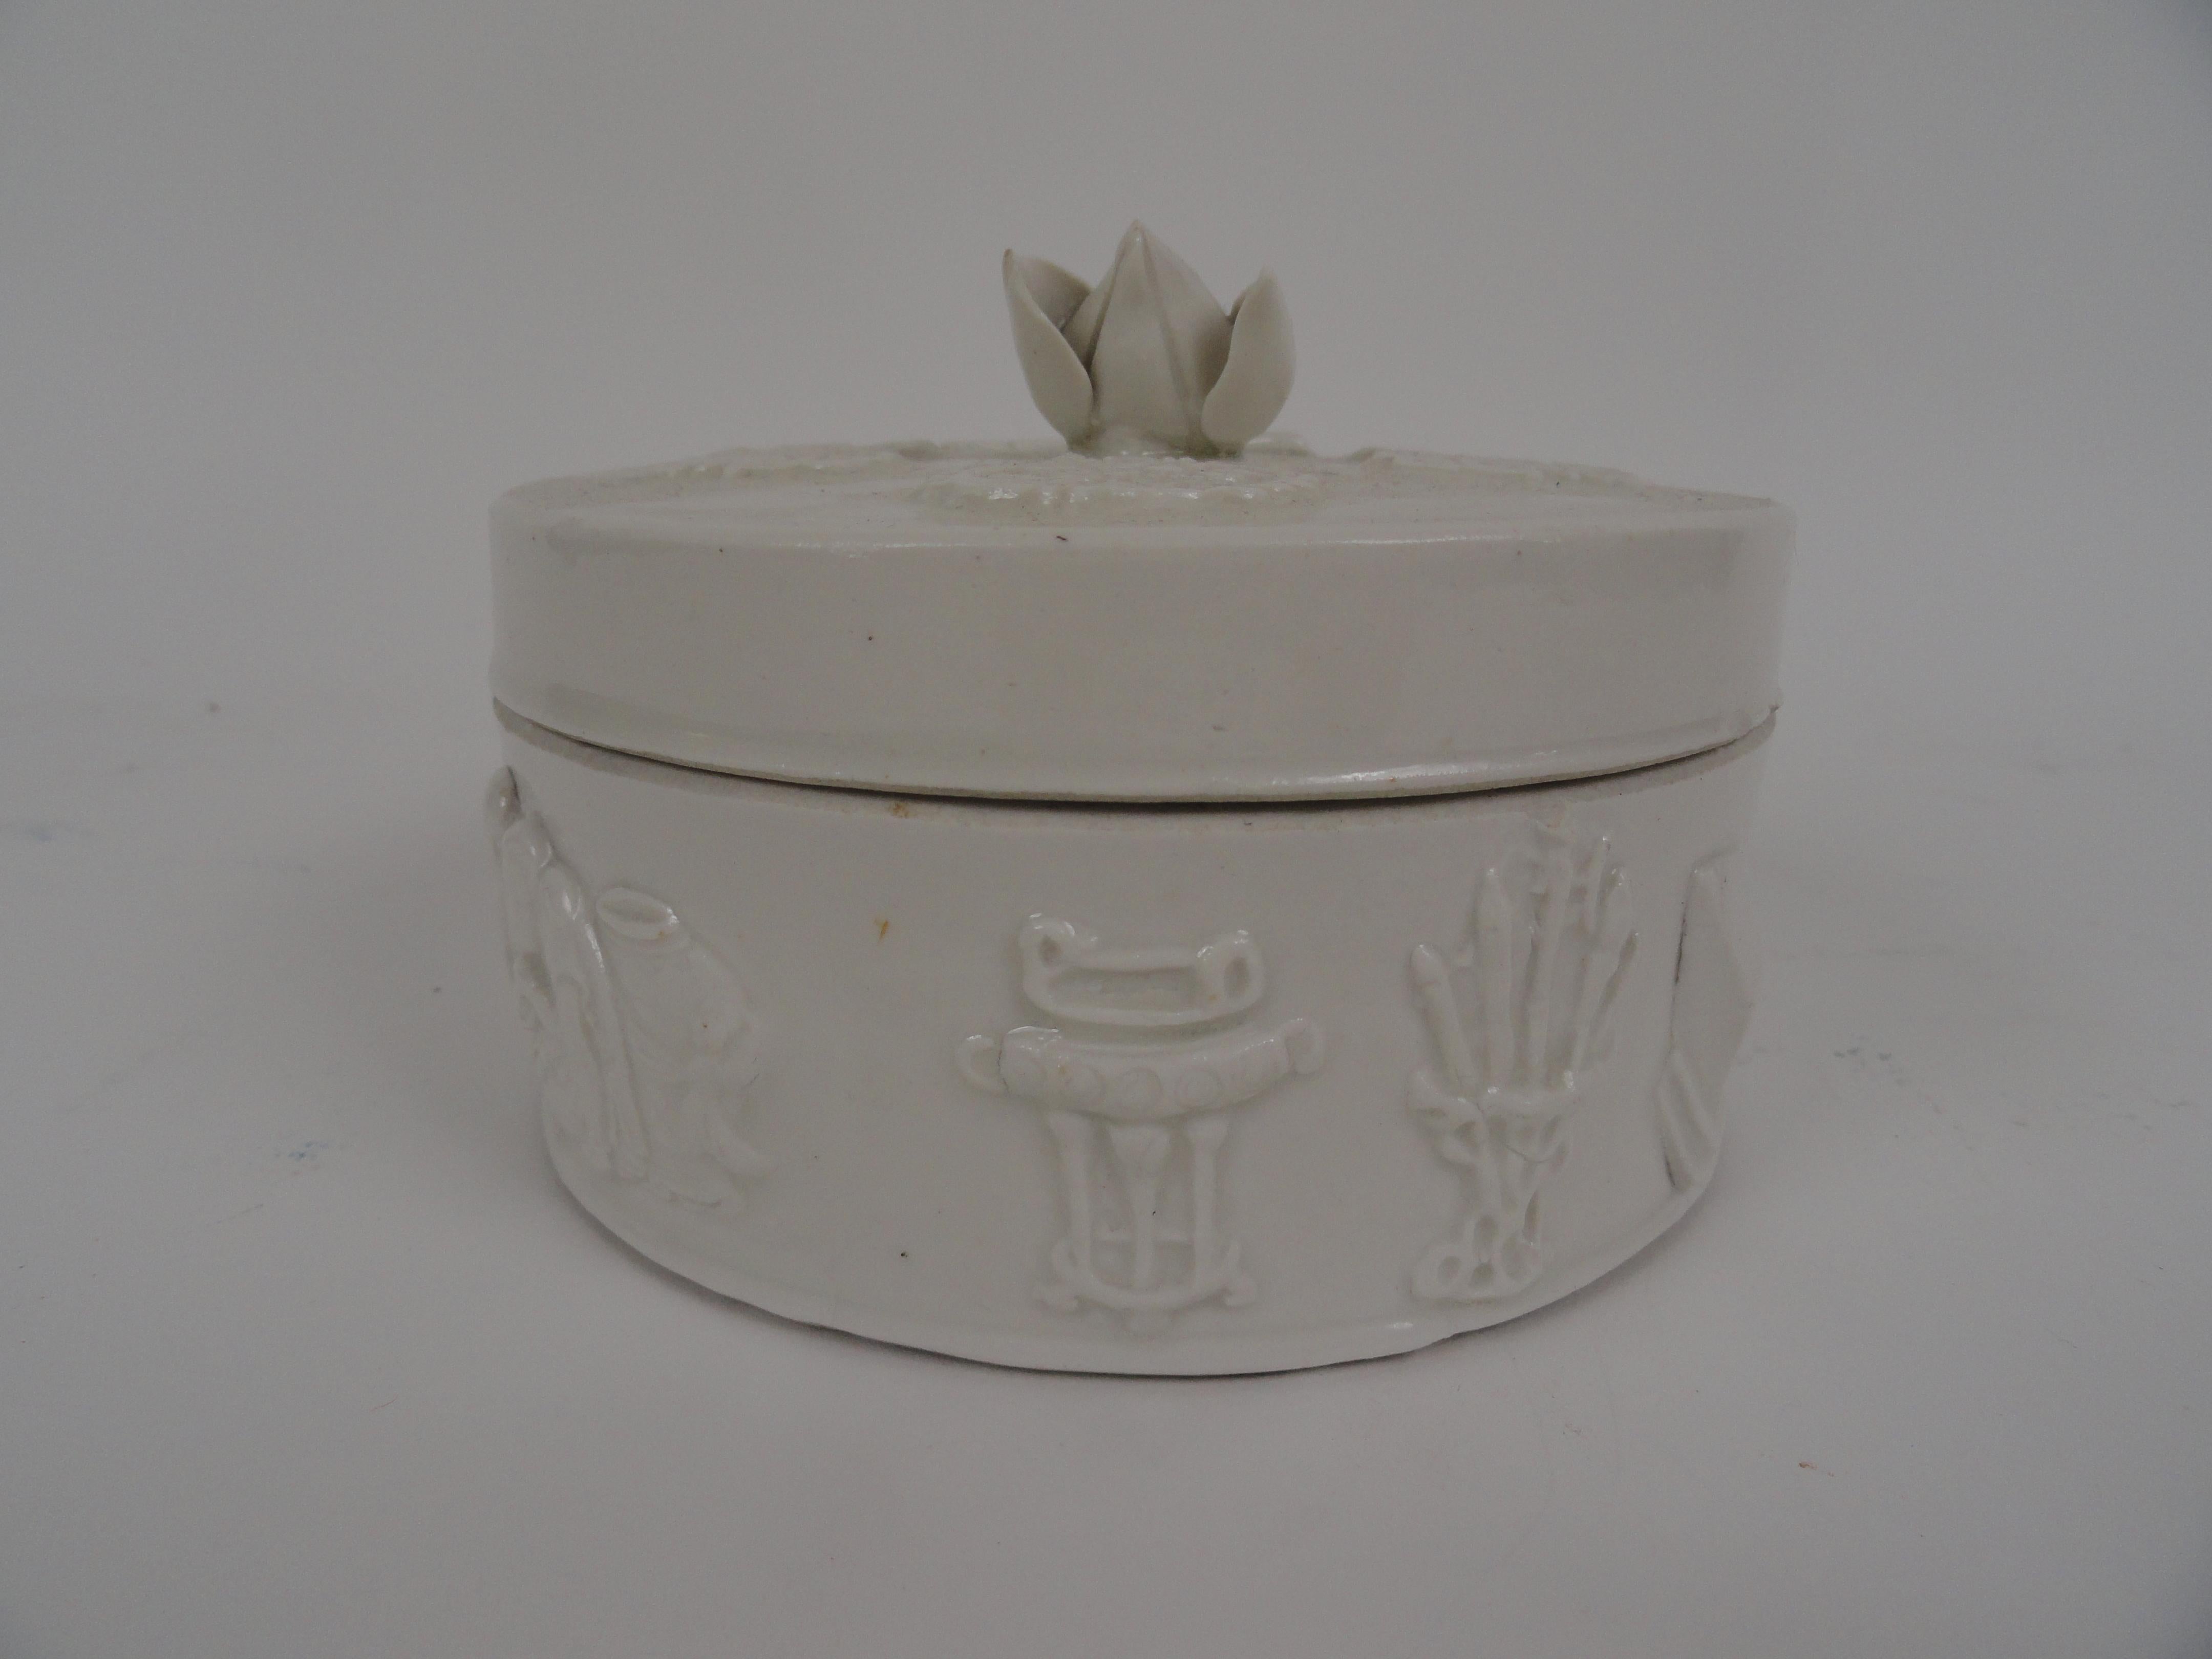 20th century Chinese round ceramic box with removable lid which has a lotus flower on top. 
Stamped 